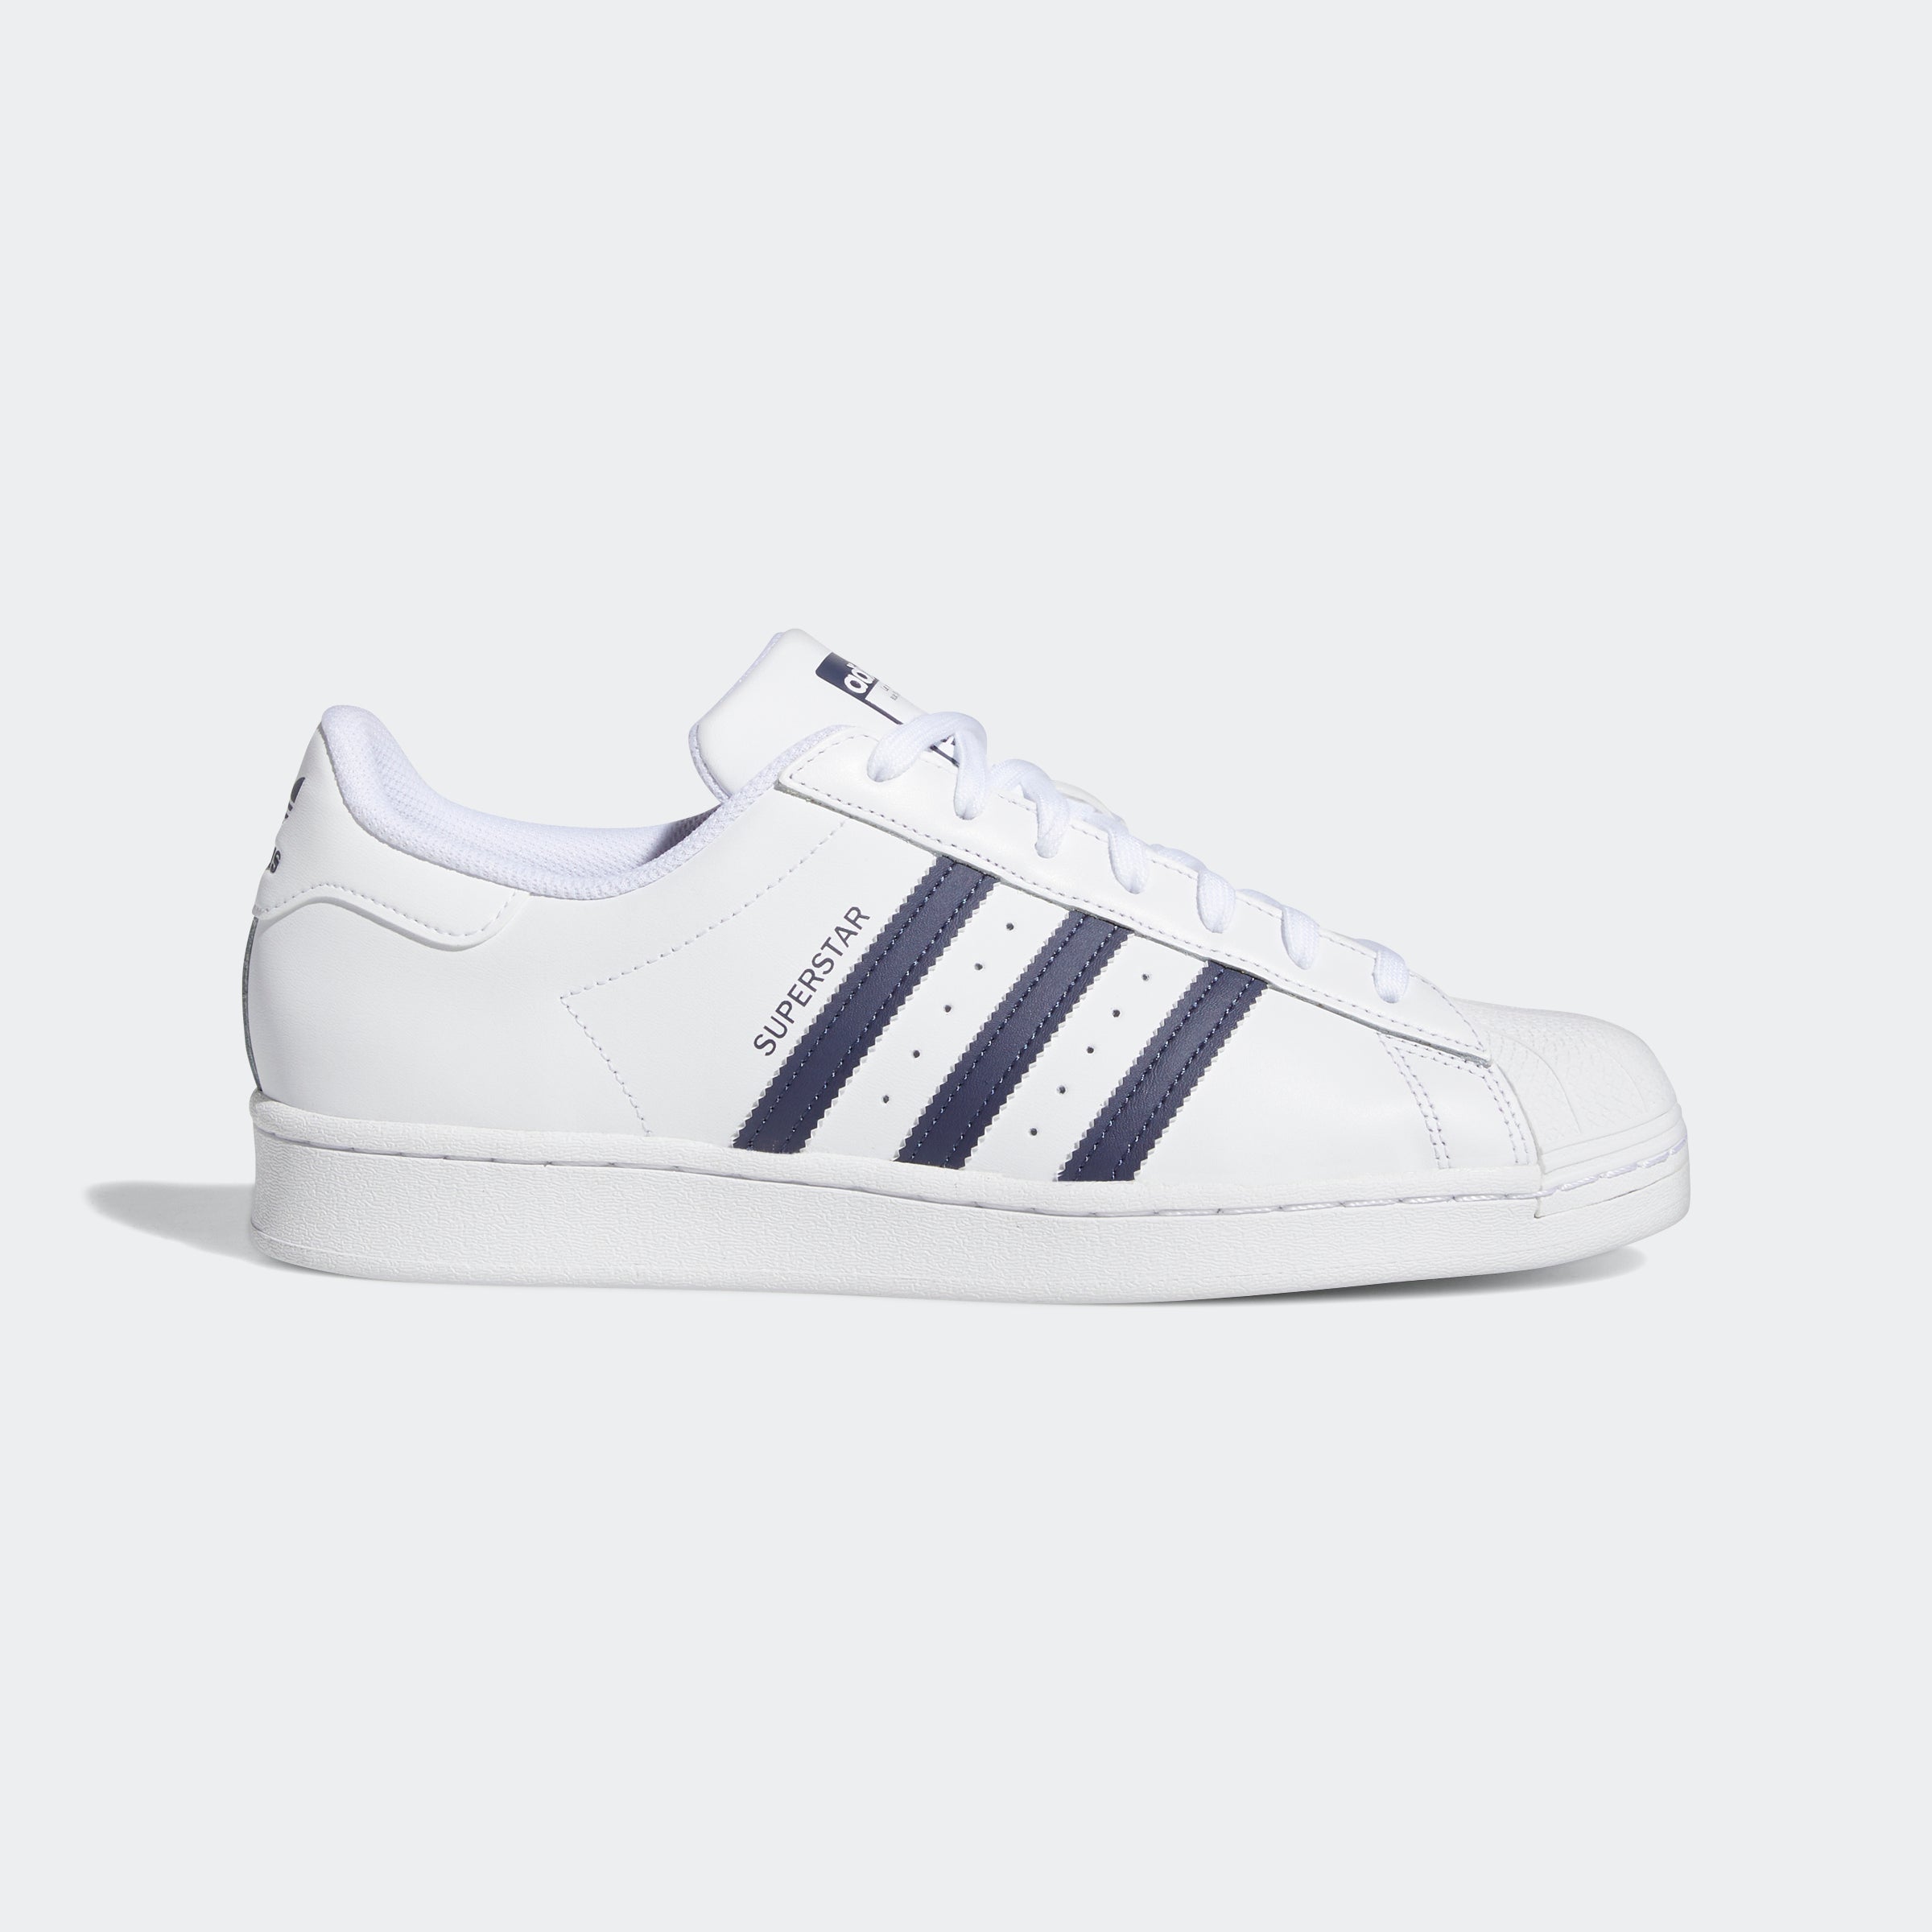 Rentmeester keten taart adidas Superstar Shoes Black White Navy GX6320 | Chicago City Sports